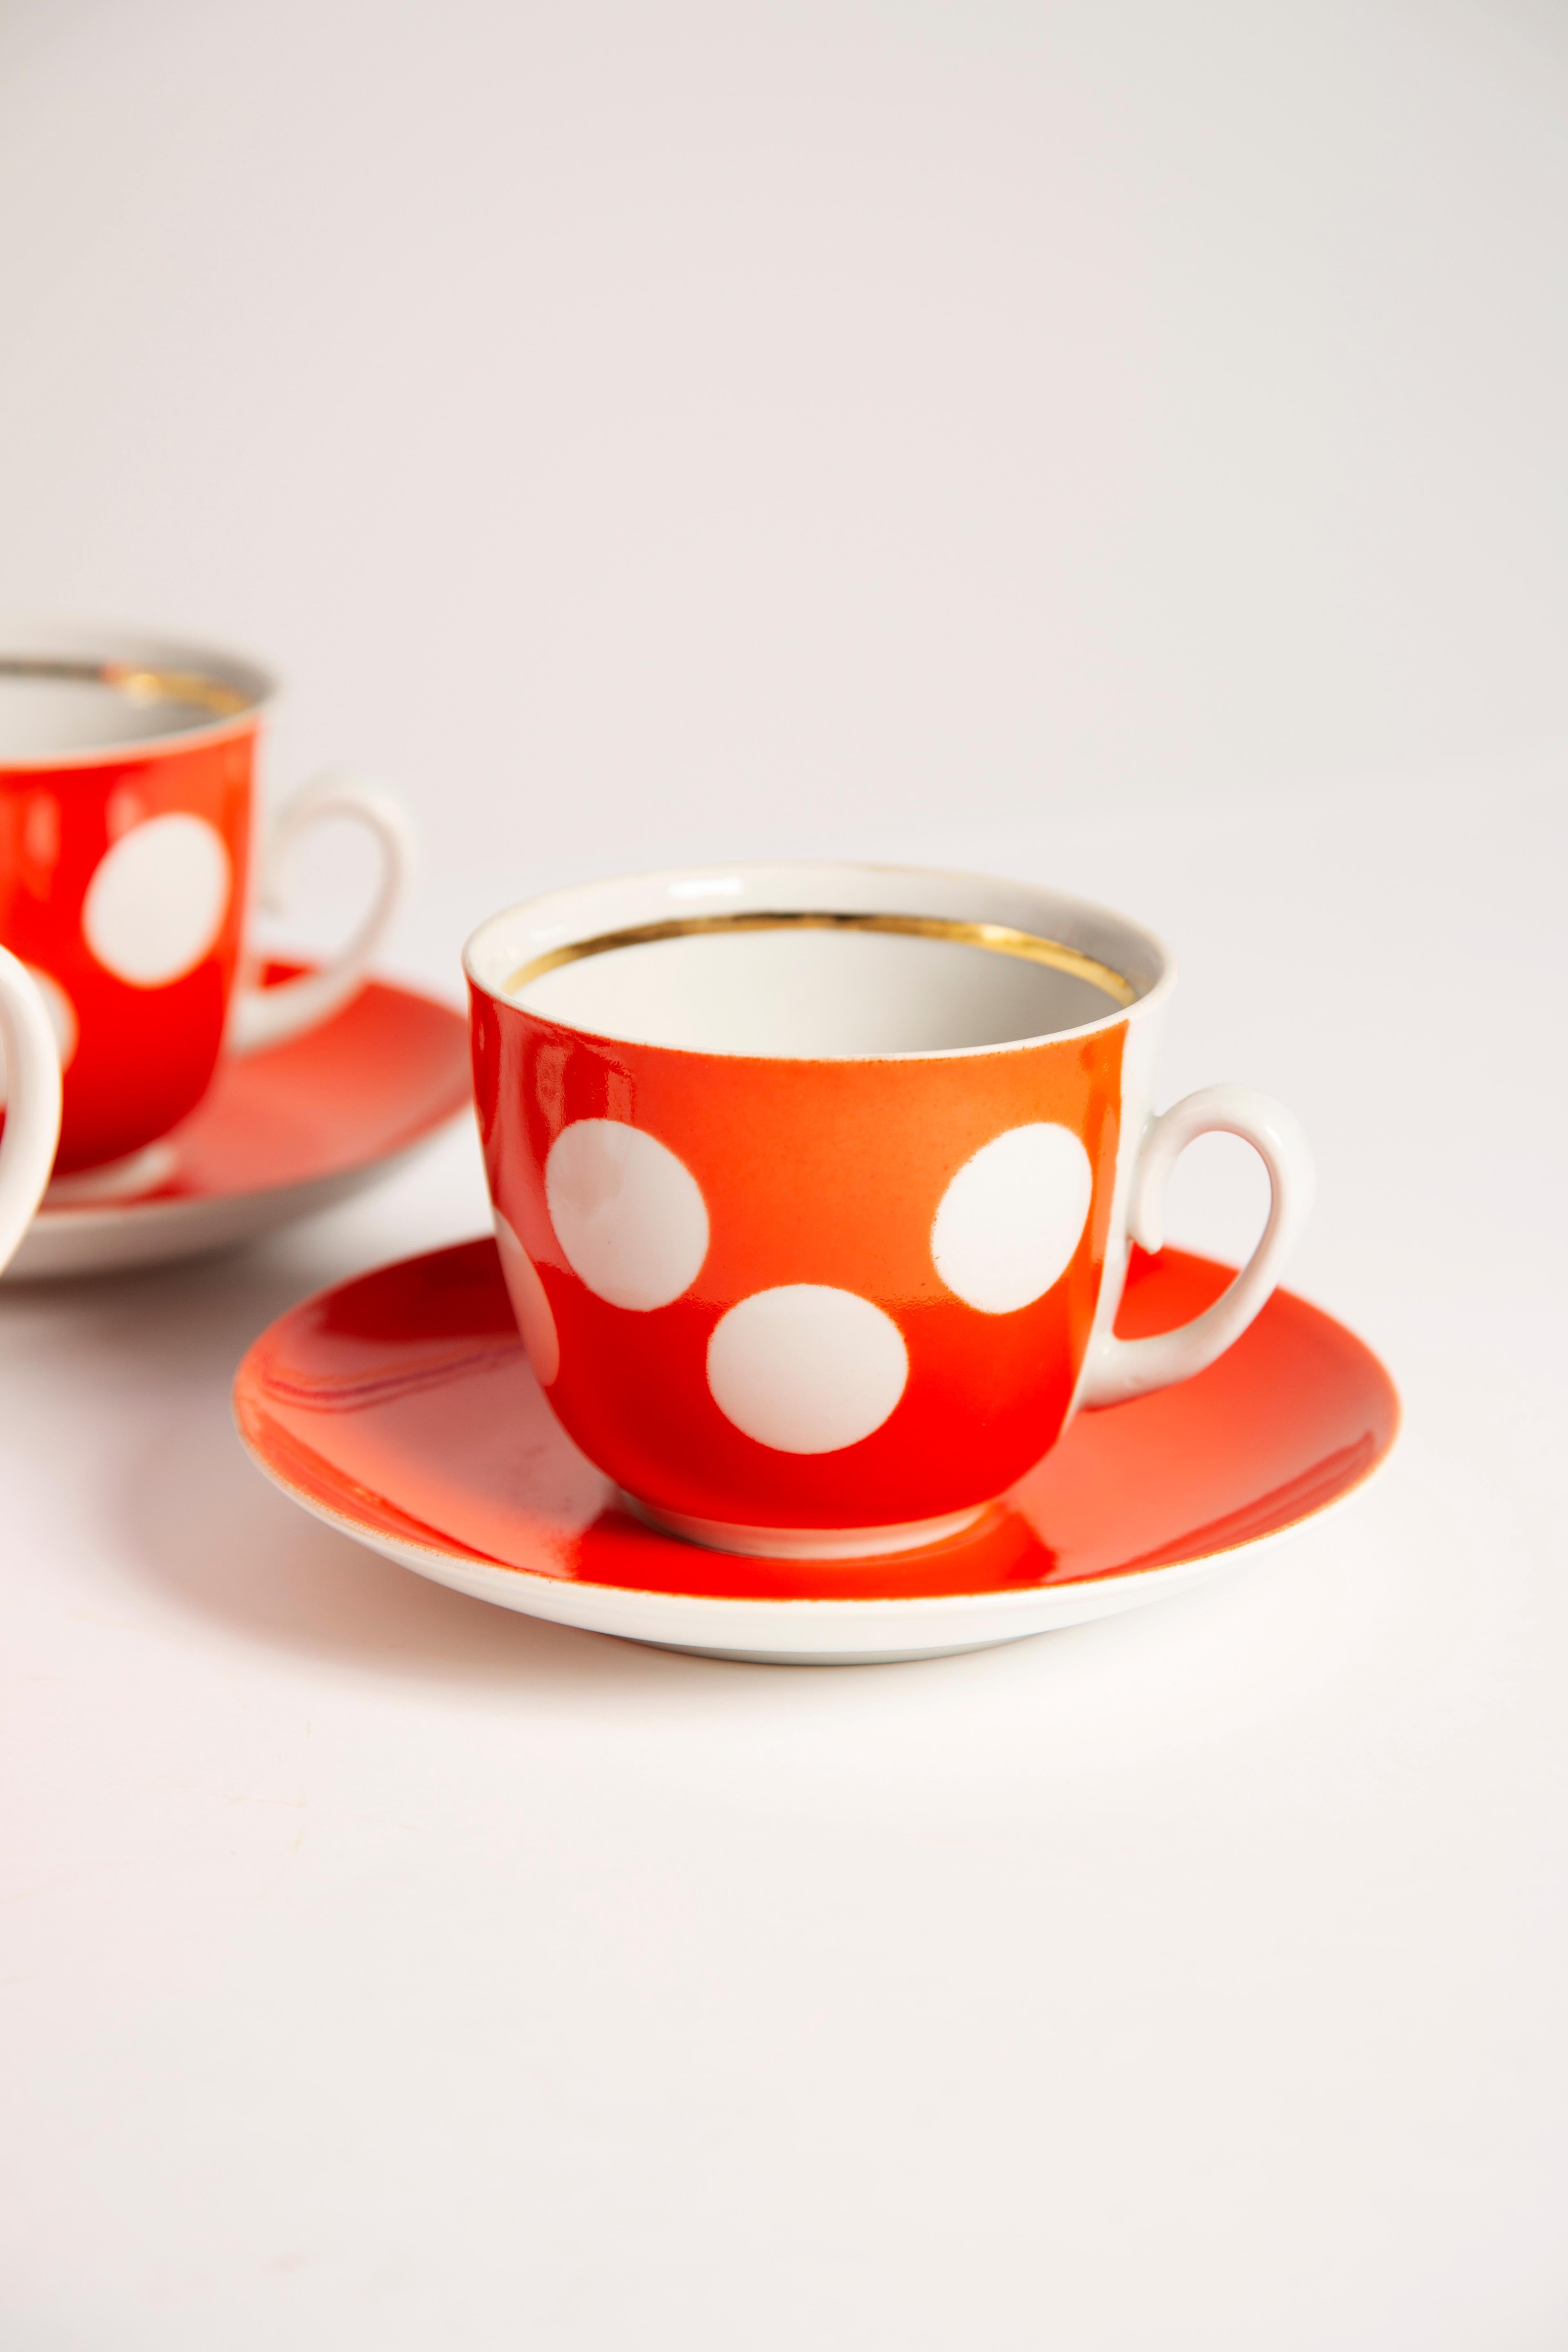 Midcentury Porcelain Red Dots Tea Coffee Service Jug and Cups, Poland, 1960 For Sale 7